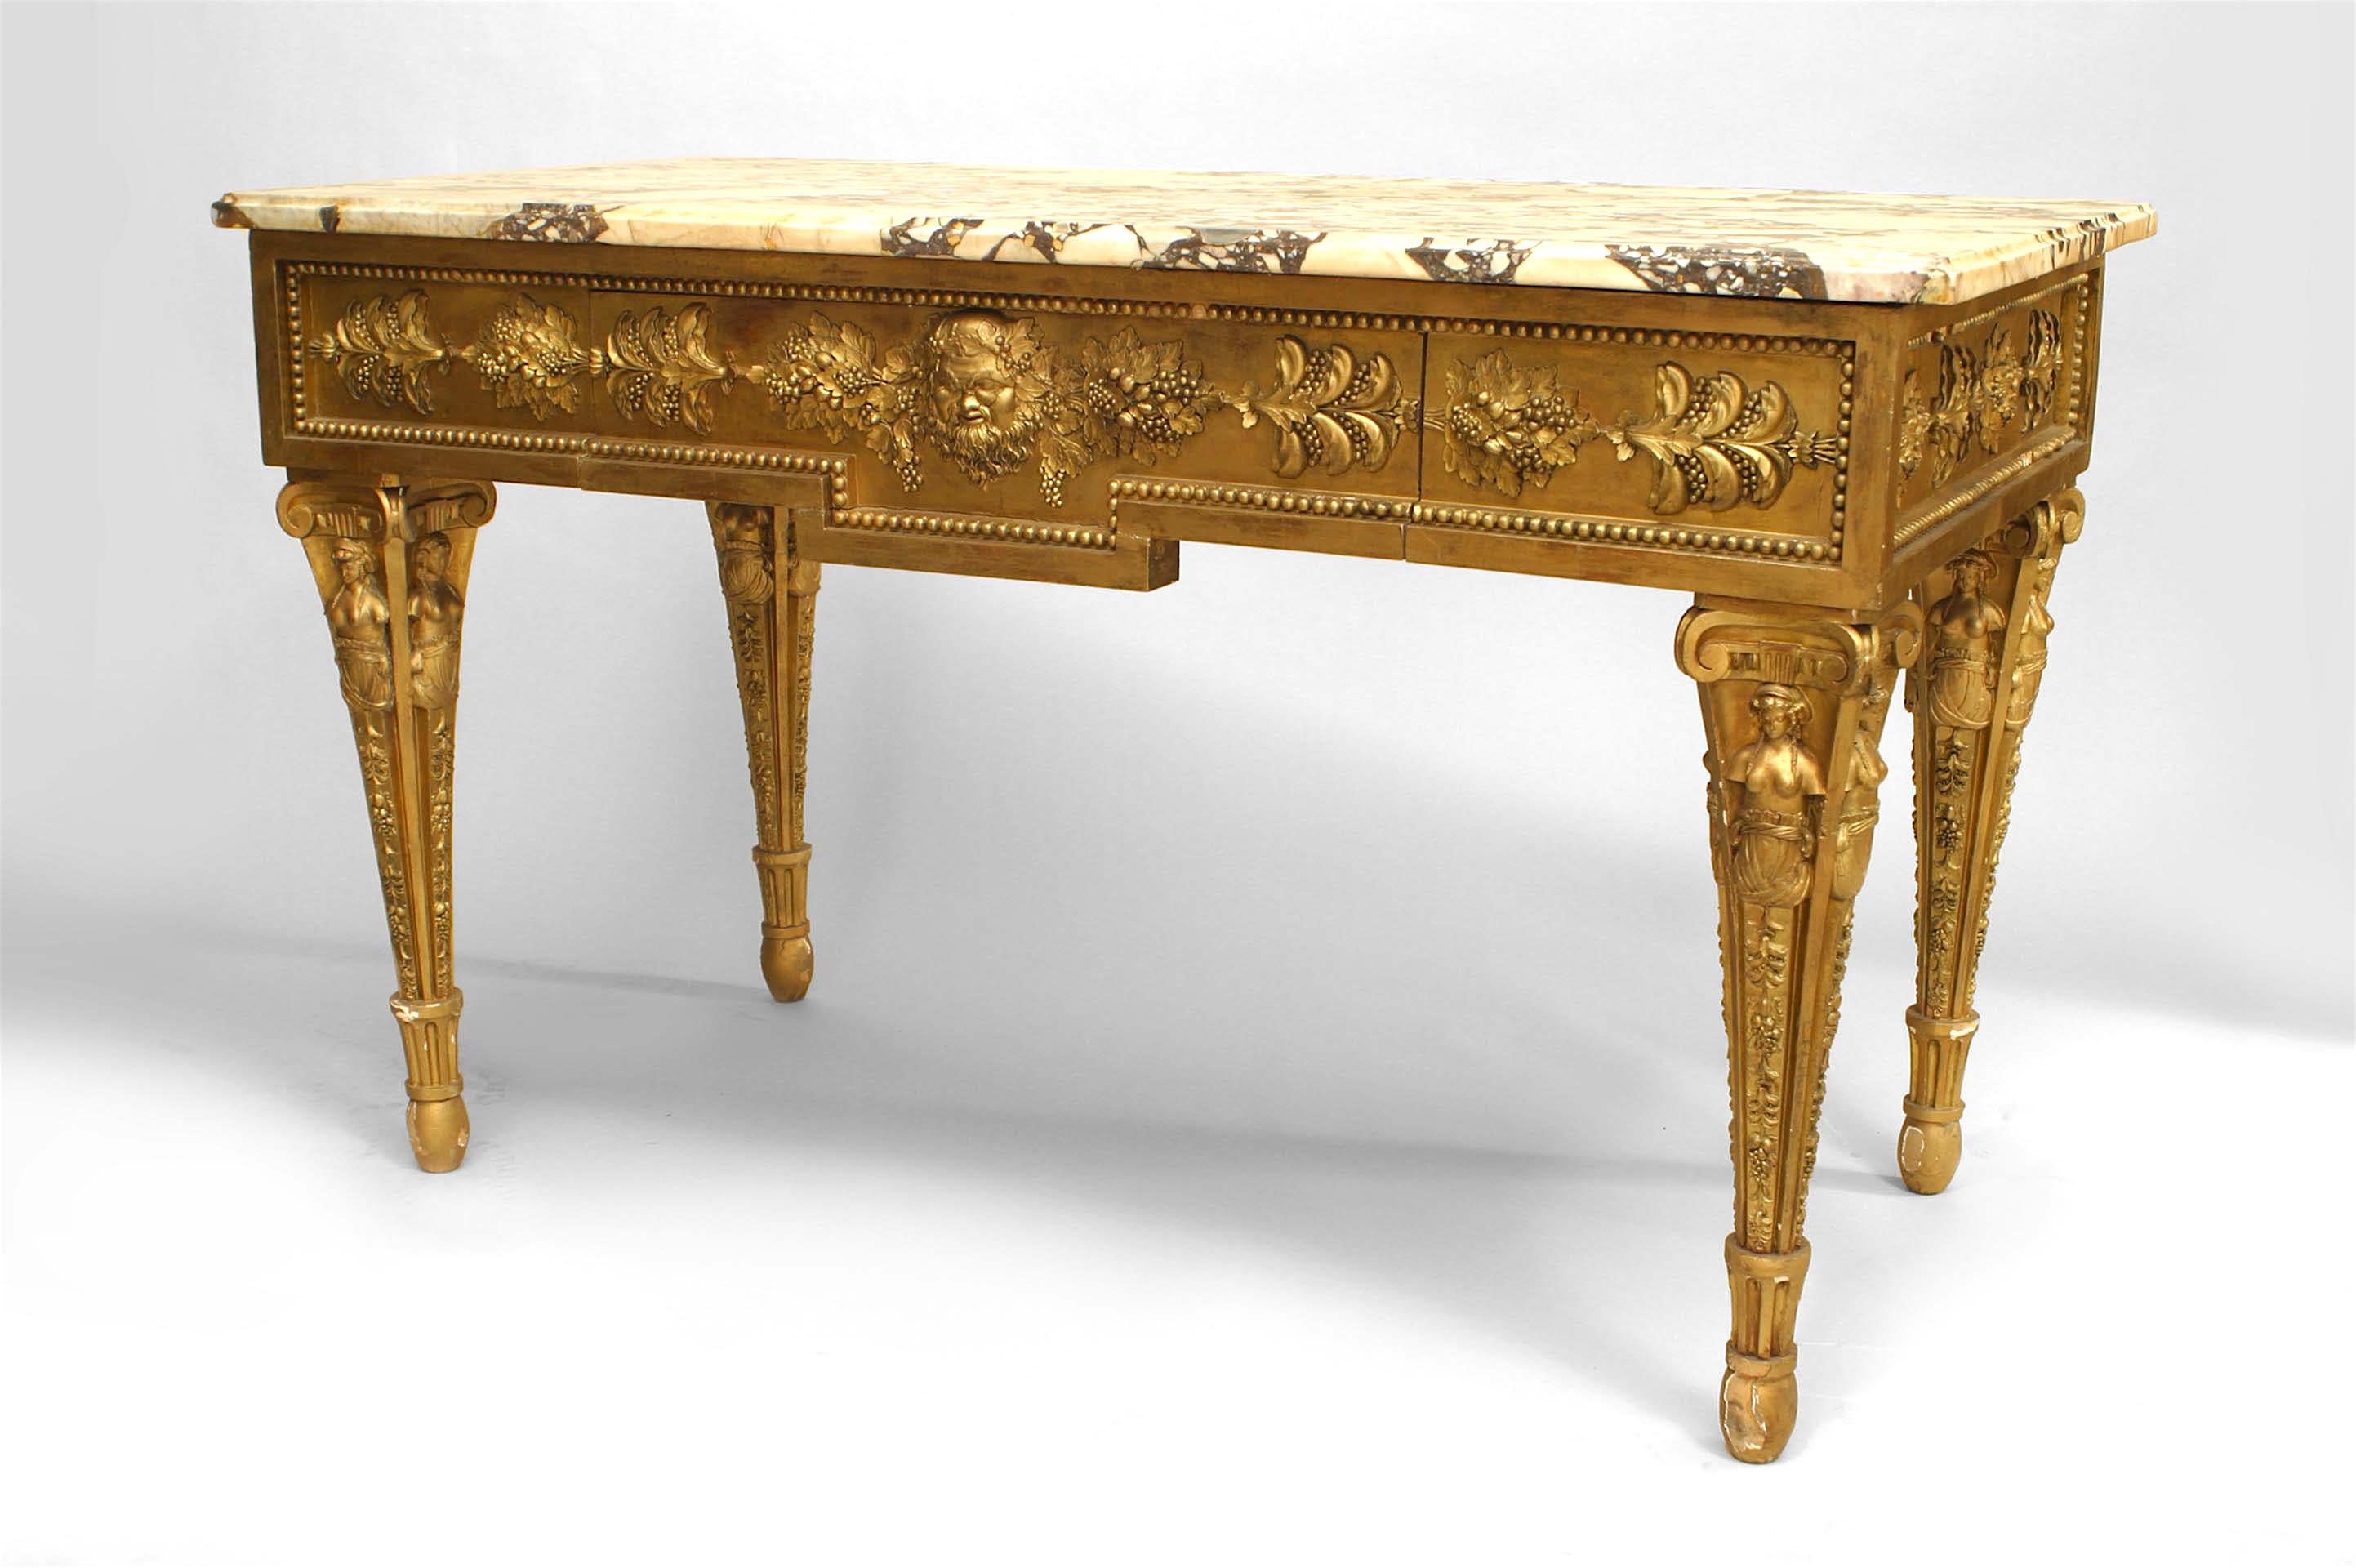 Italian Neo-classic (18th Century) gold painted console table with applied grape and fruit design to apron with a center drawer and figural tapered legs with a white grained marble top.
